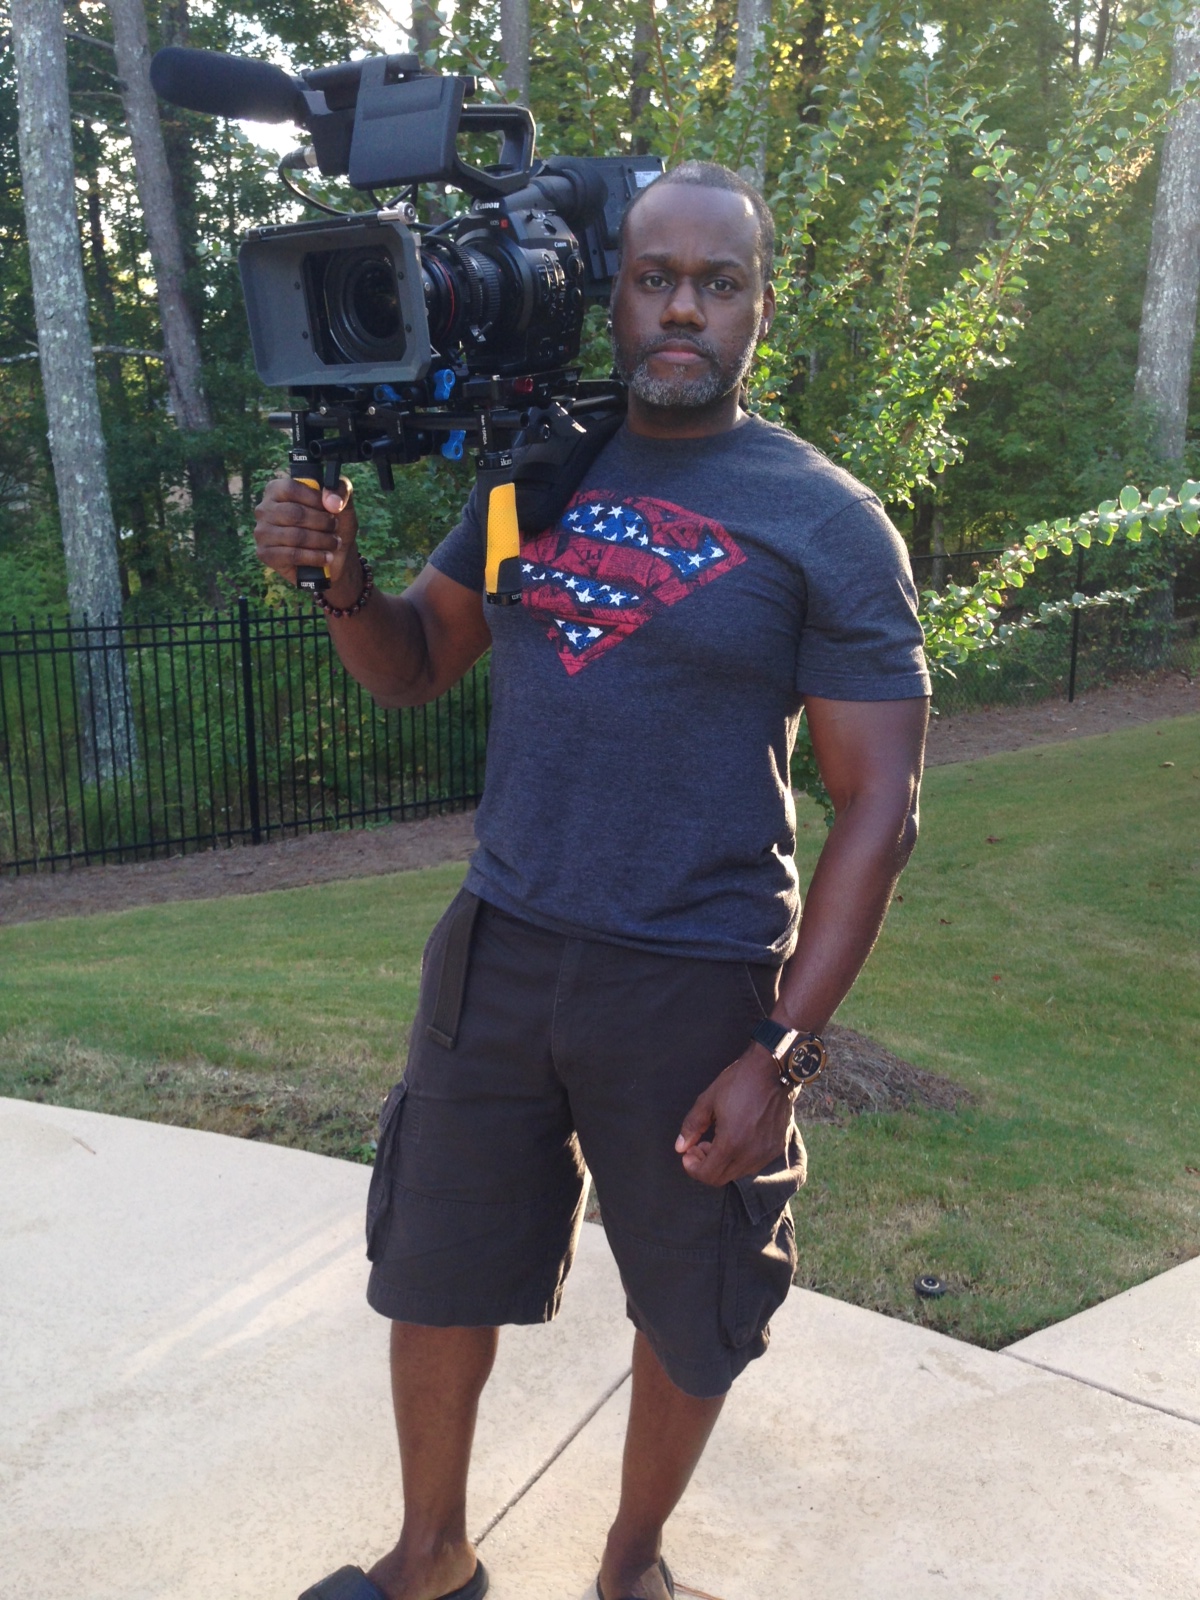 CWEST & The Canon C300 (his favorite tool on set).